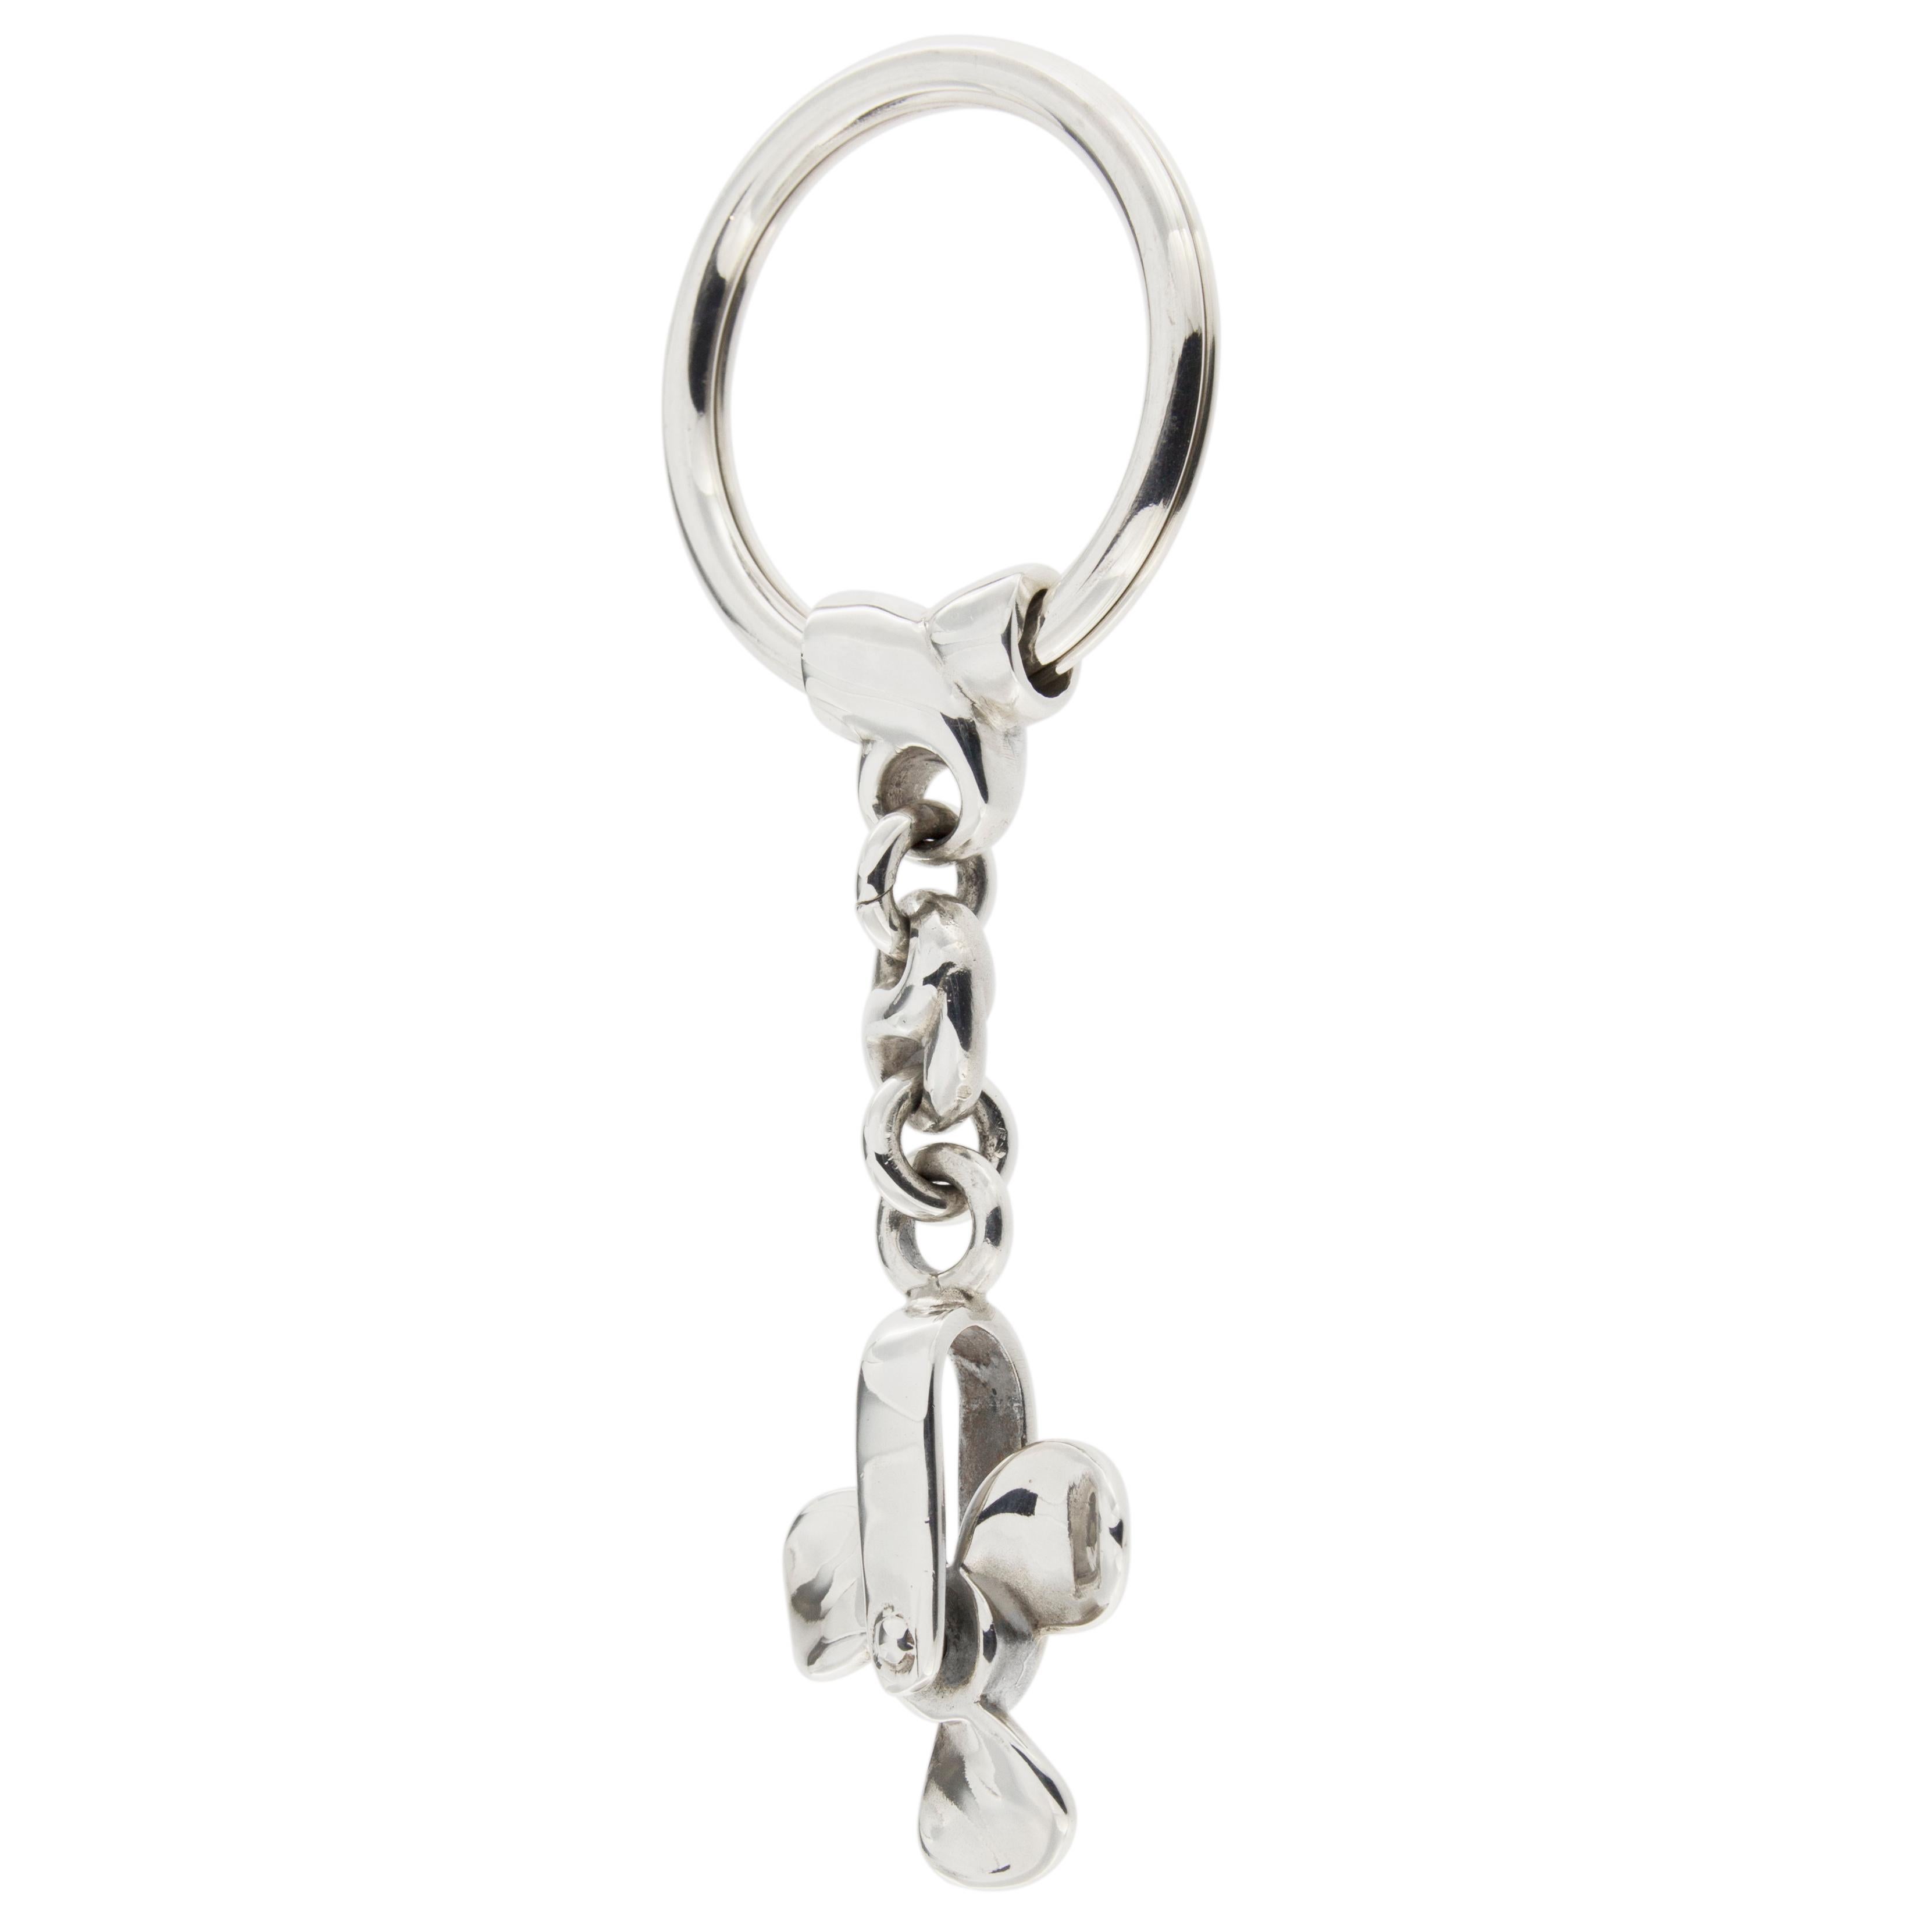 Jona design collection, hand crafted in Italy, rhodium plated Sterling Silver propeller key holder. Propeller dimensions : Diameter 0.84 in/ 21.41 mm x Depth: 0.33 in./ 8.39 mm
All Jona jewelry is new and has never been previously owned or worn.